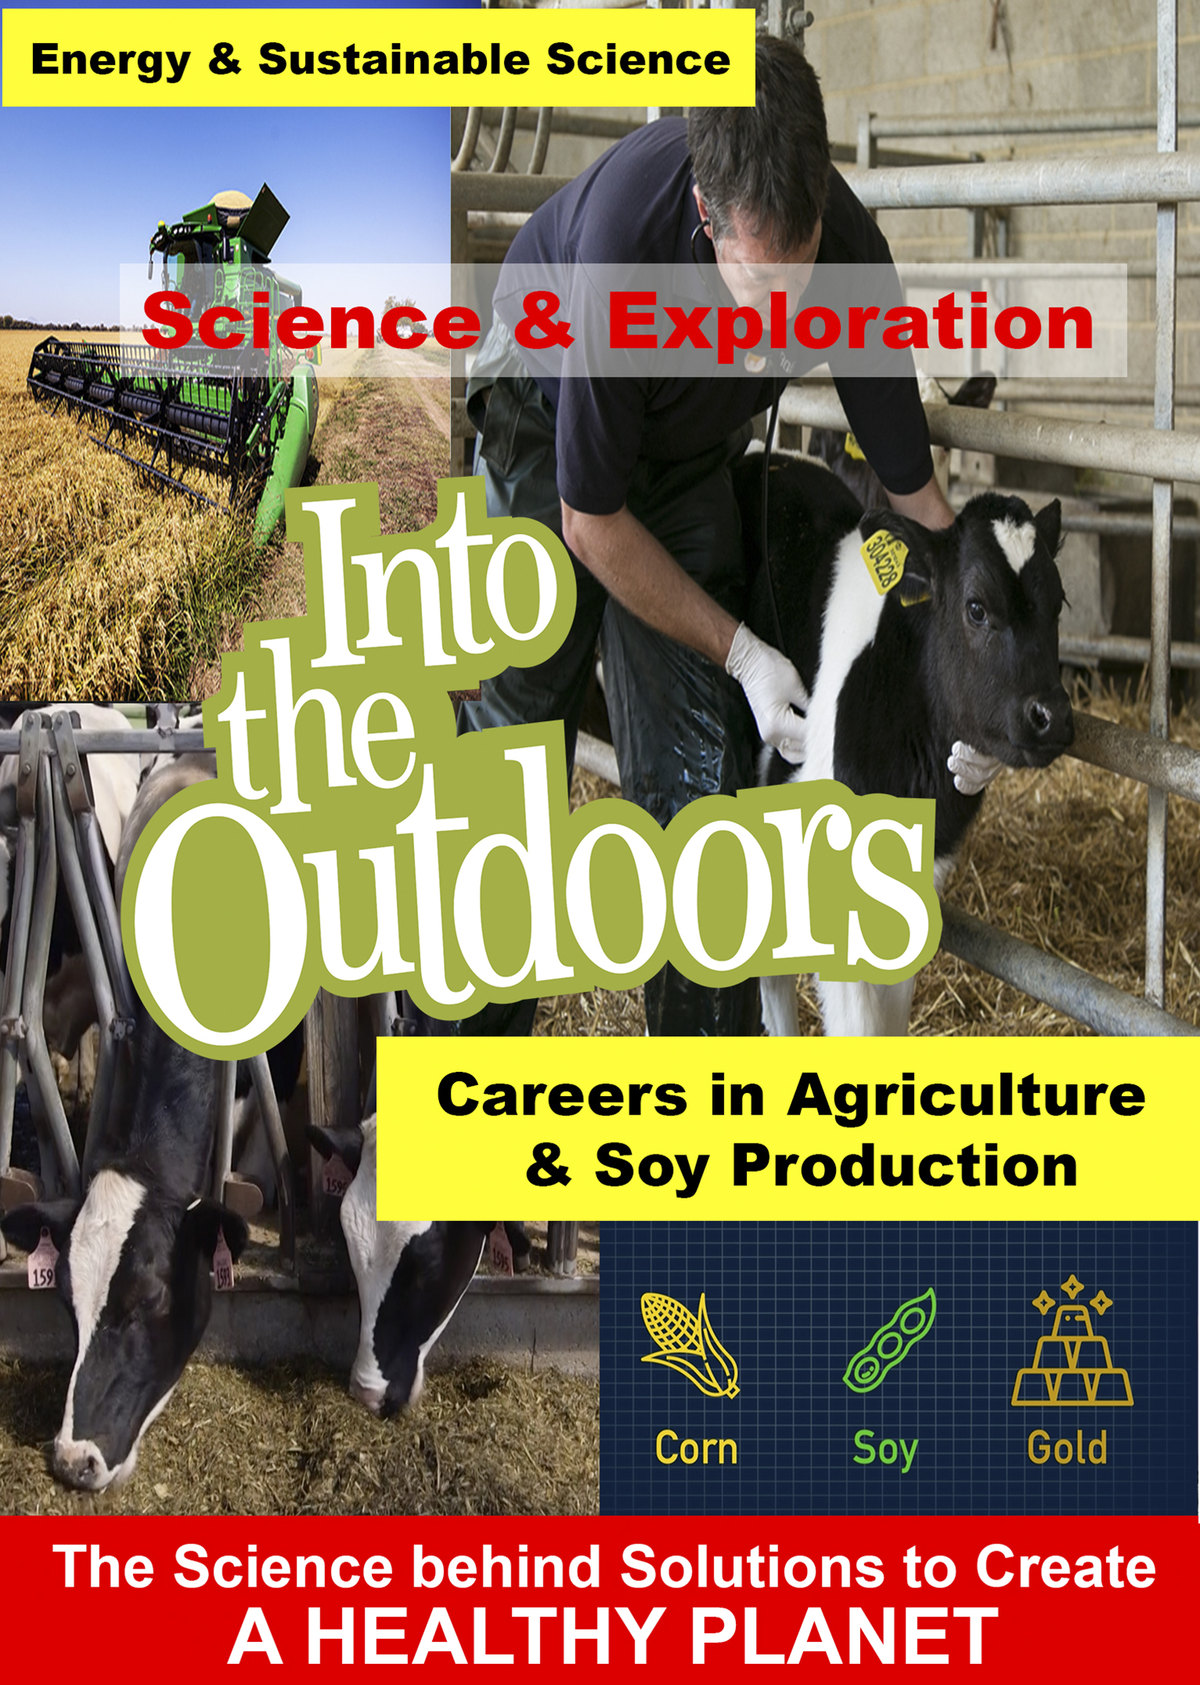 K4997 - Careers in Agriculture & Soy Production